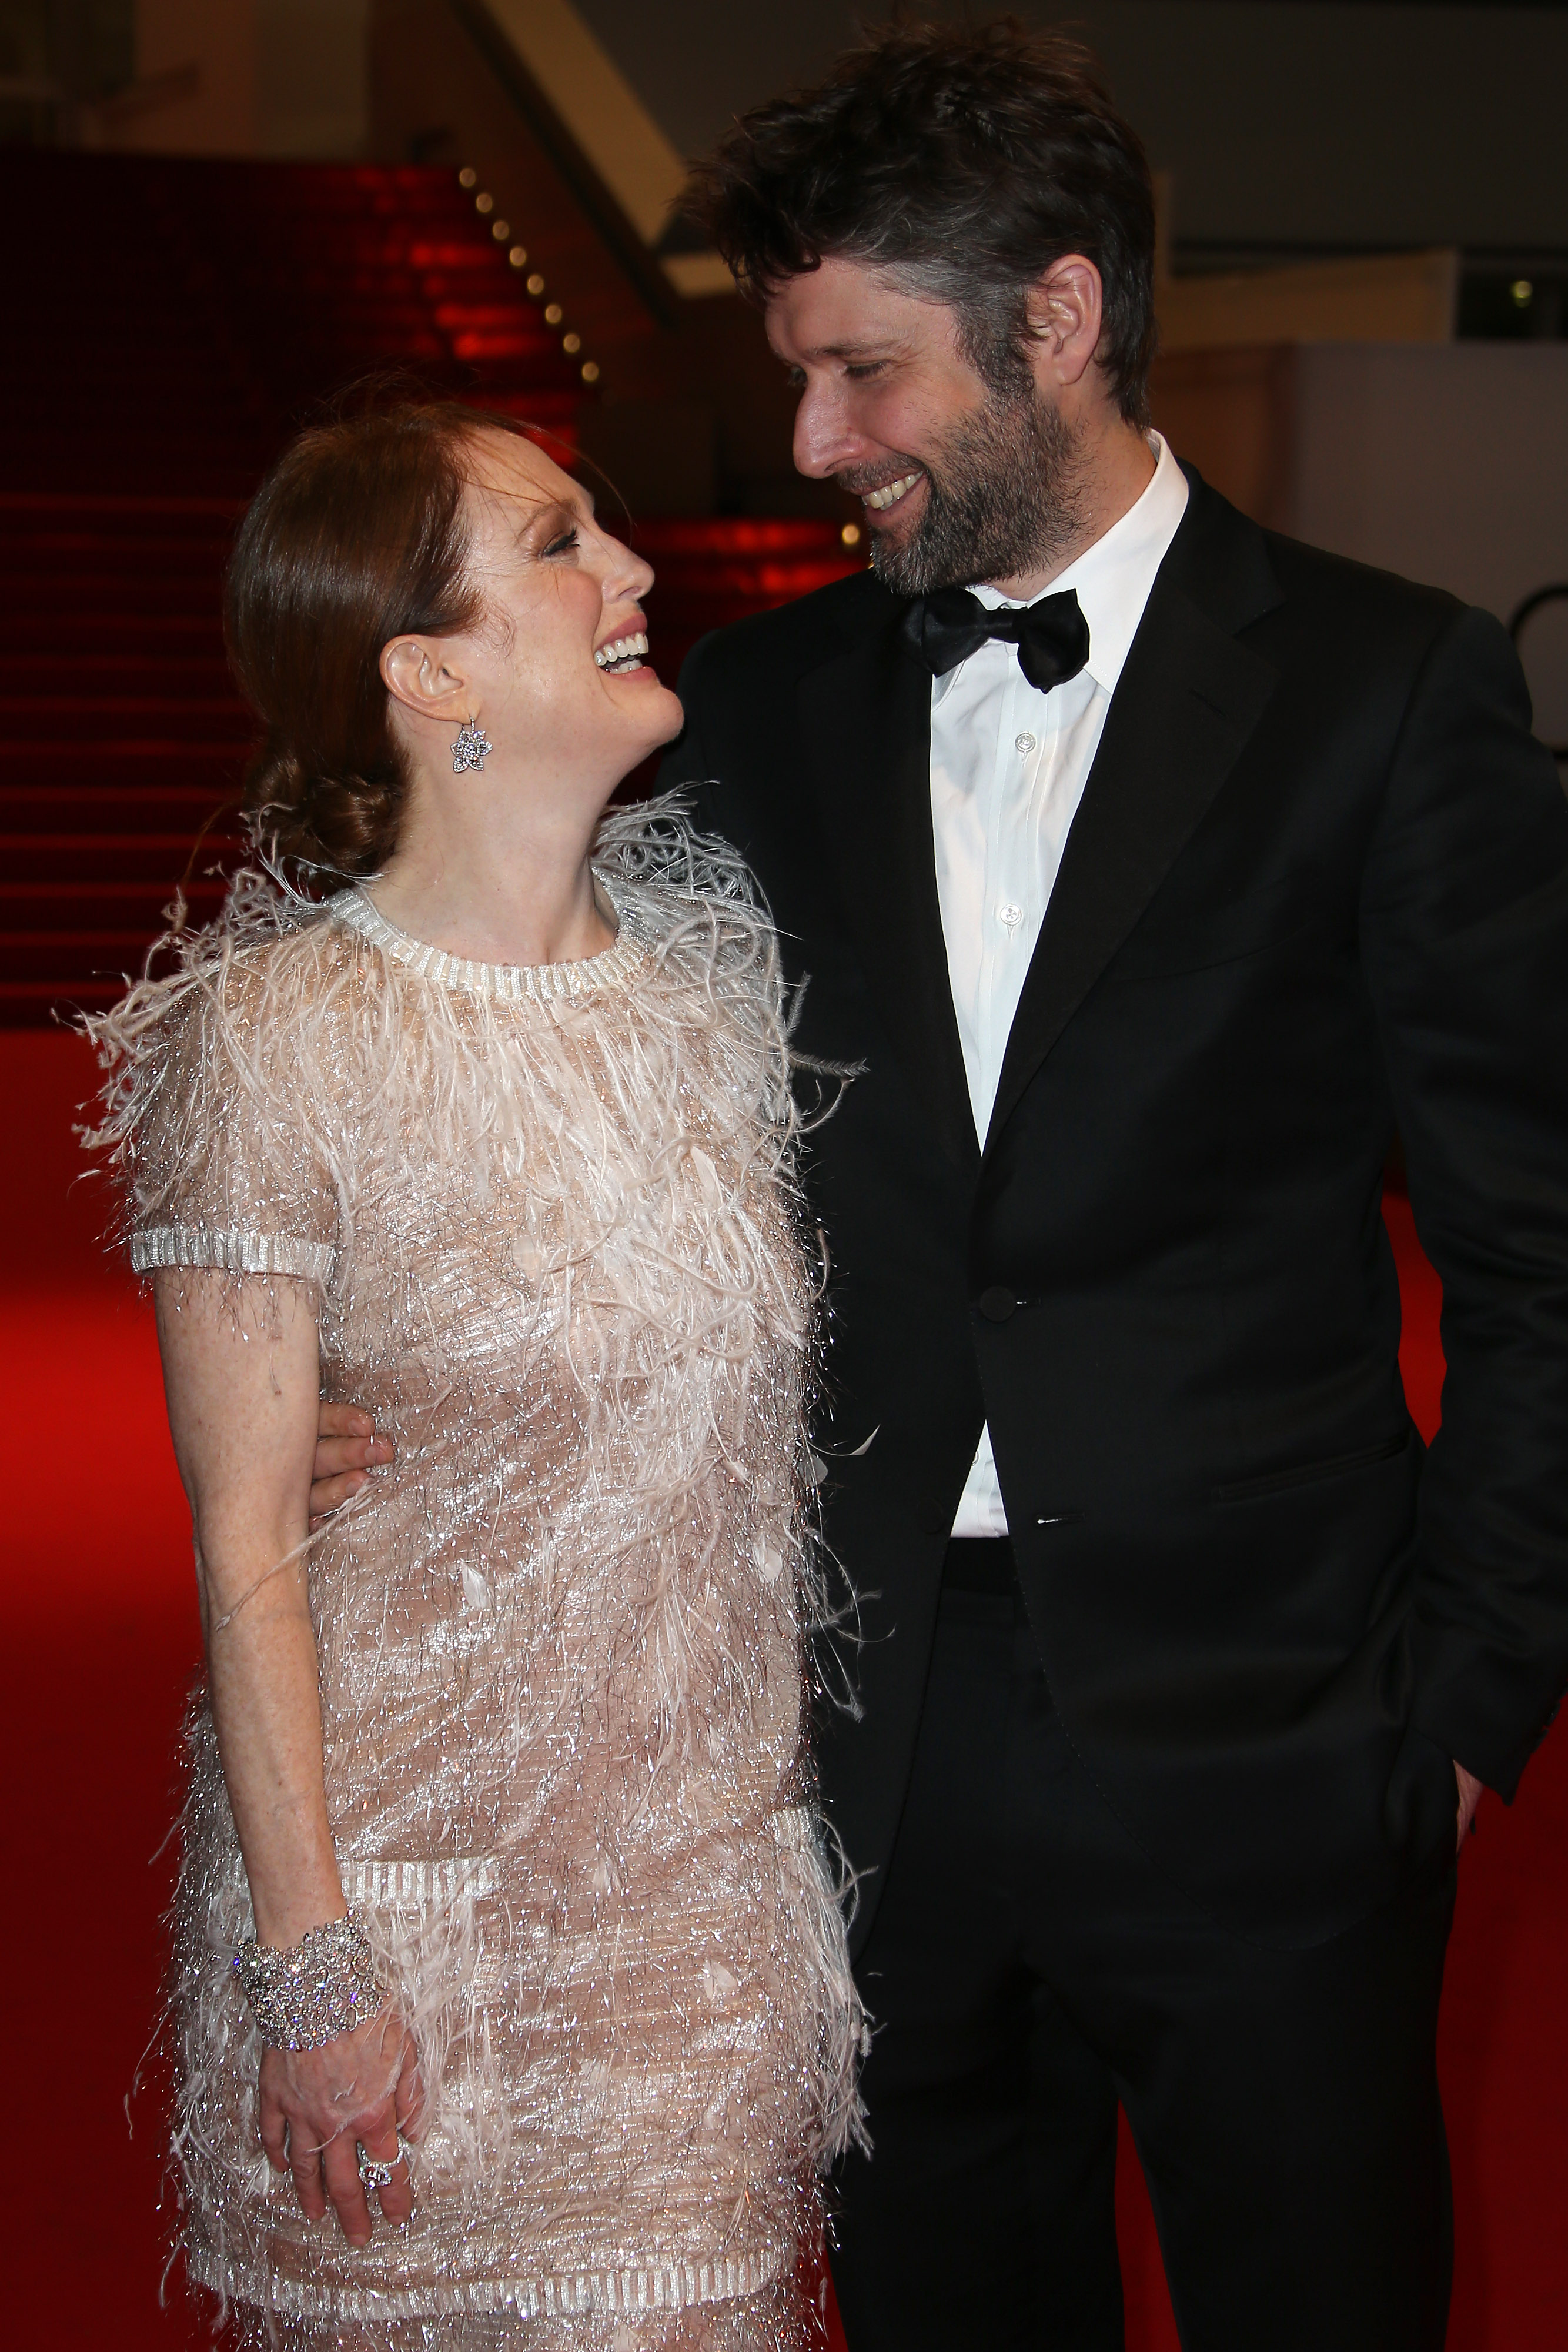 Julianne Moore and Bart Freundlich at "The Maps to the Stars" premiere in Cannes, France on May 19, 2014 | Source: Getty Images